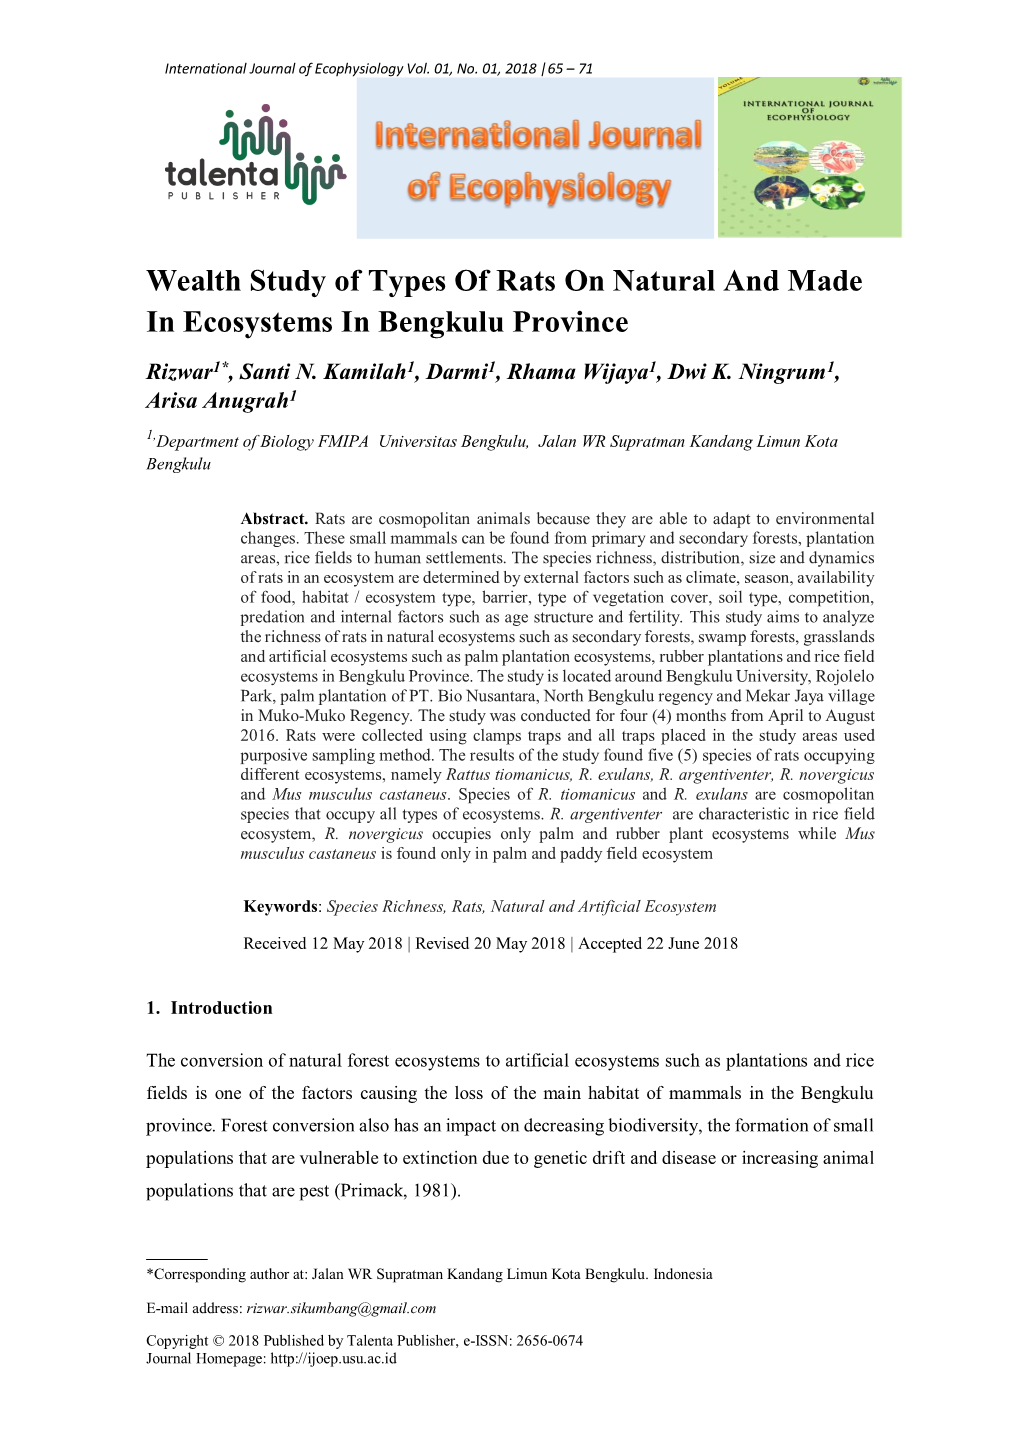 Wealth Study of Types of Rats on Natural and Made in Ecosystems in Bengkulu Province Rizwar1*, Santi N